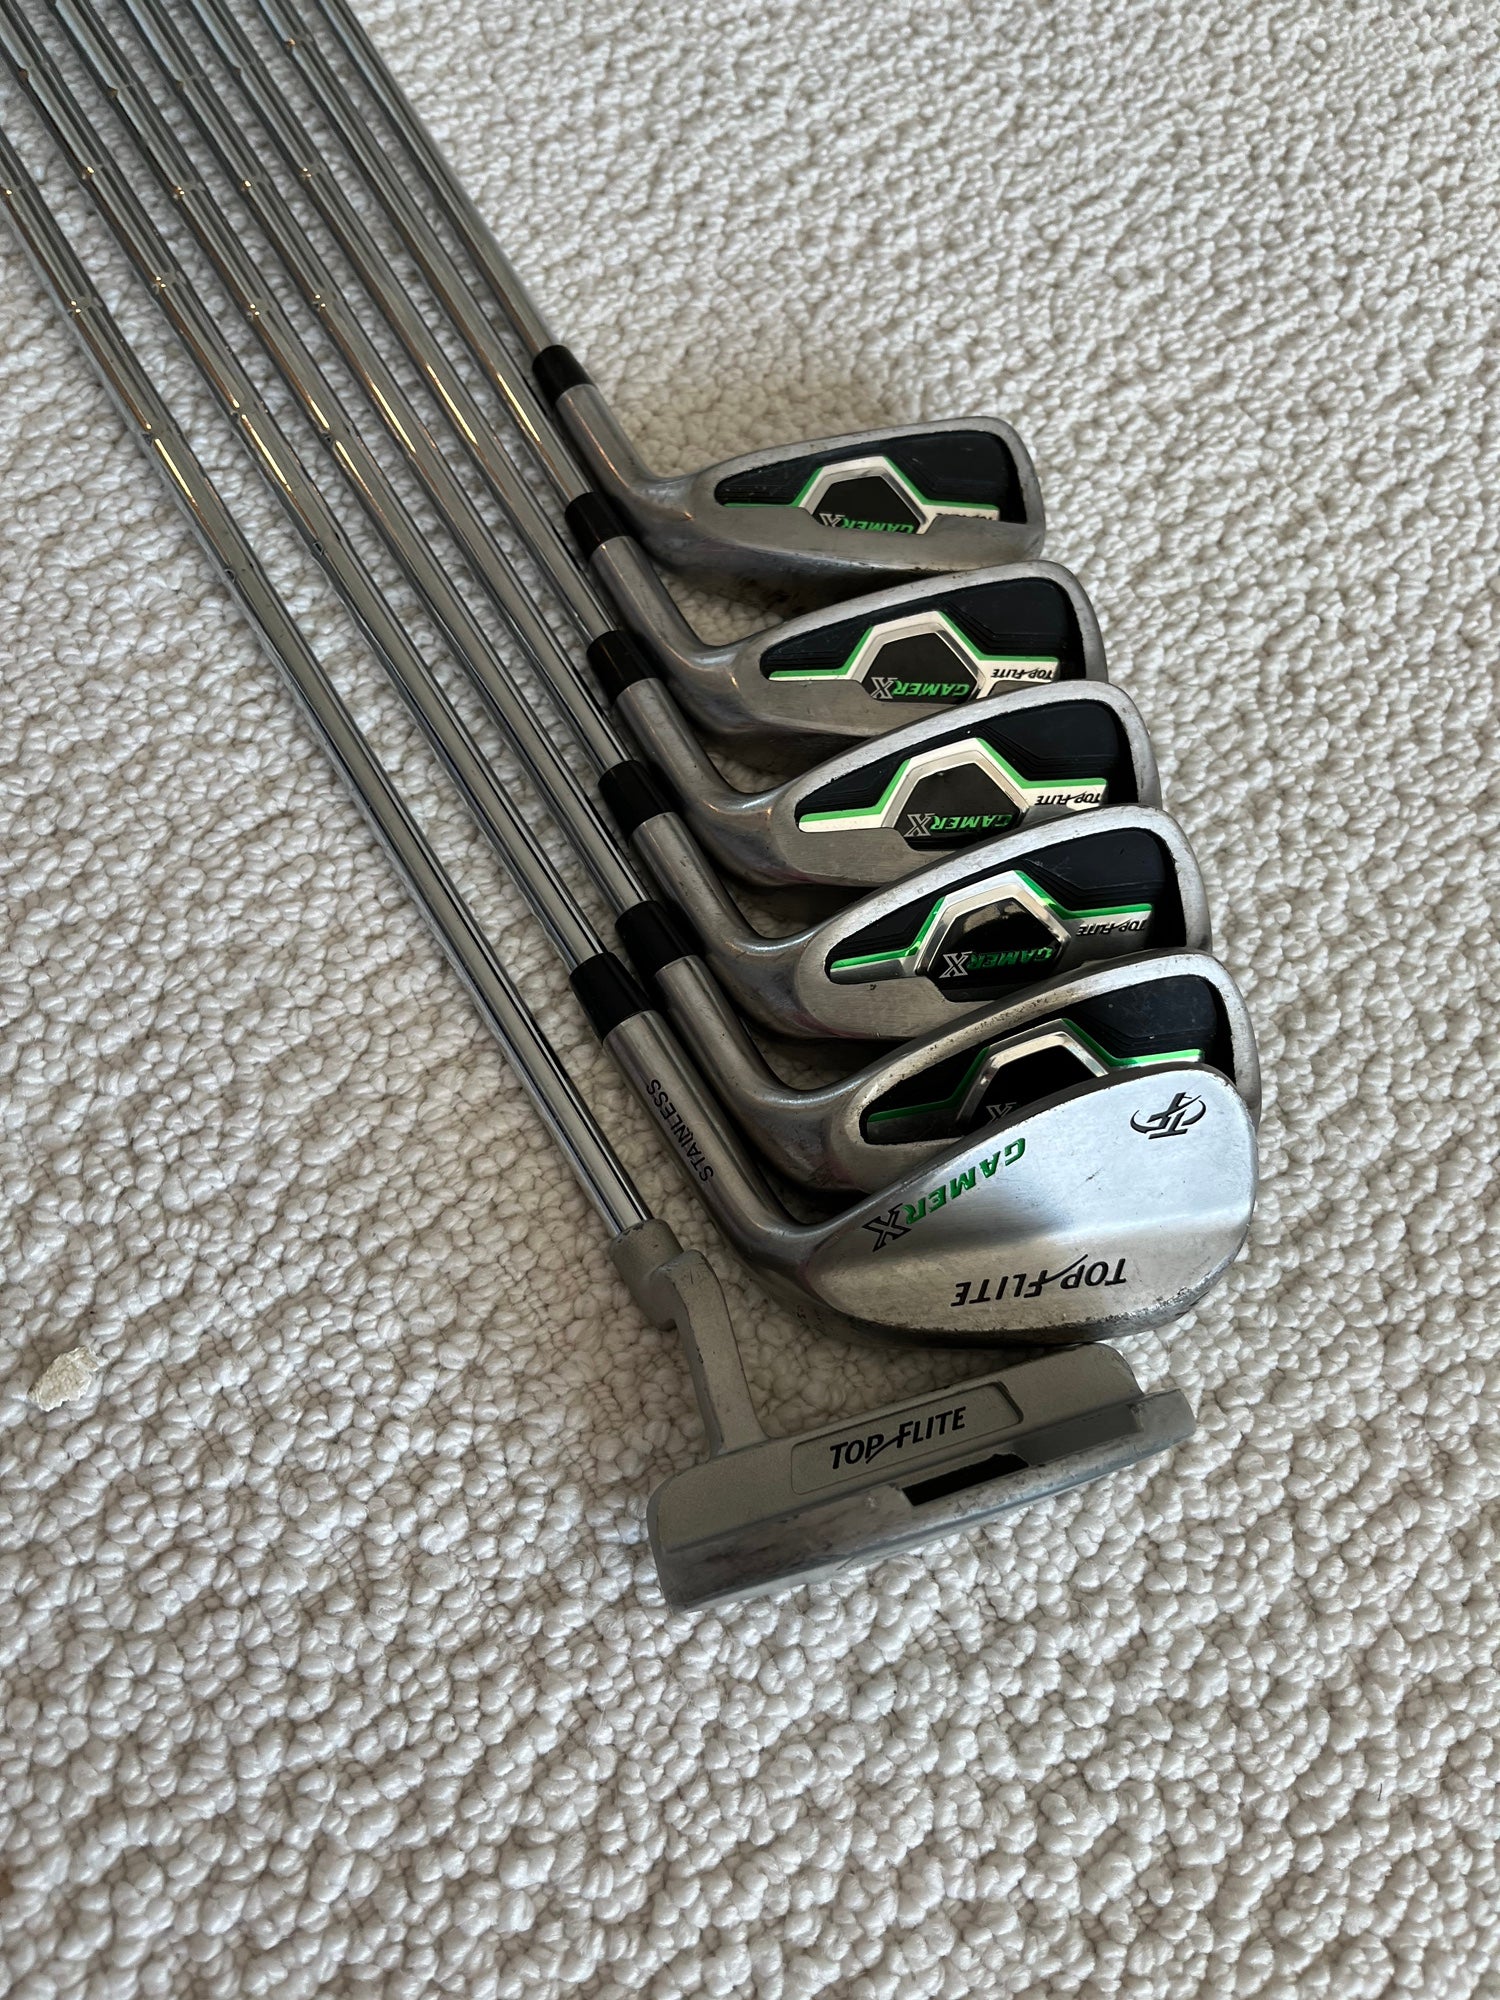 Top Flite Golf Iron Sets for sale | New and Used on SidelineSwap